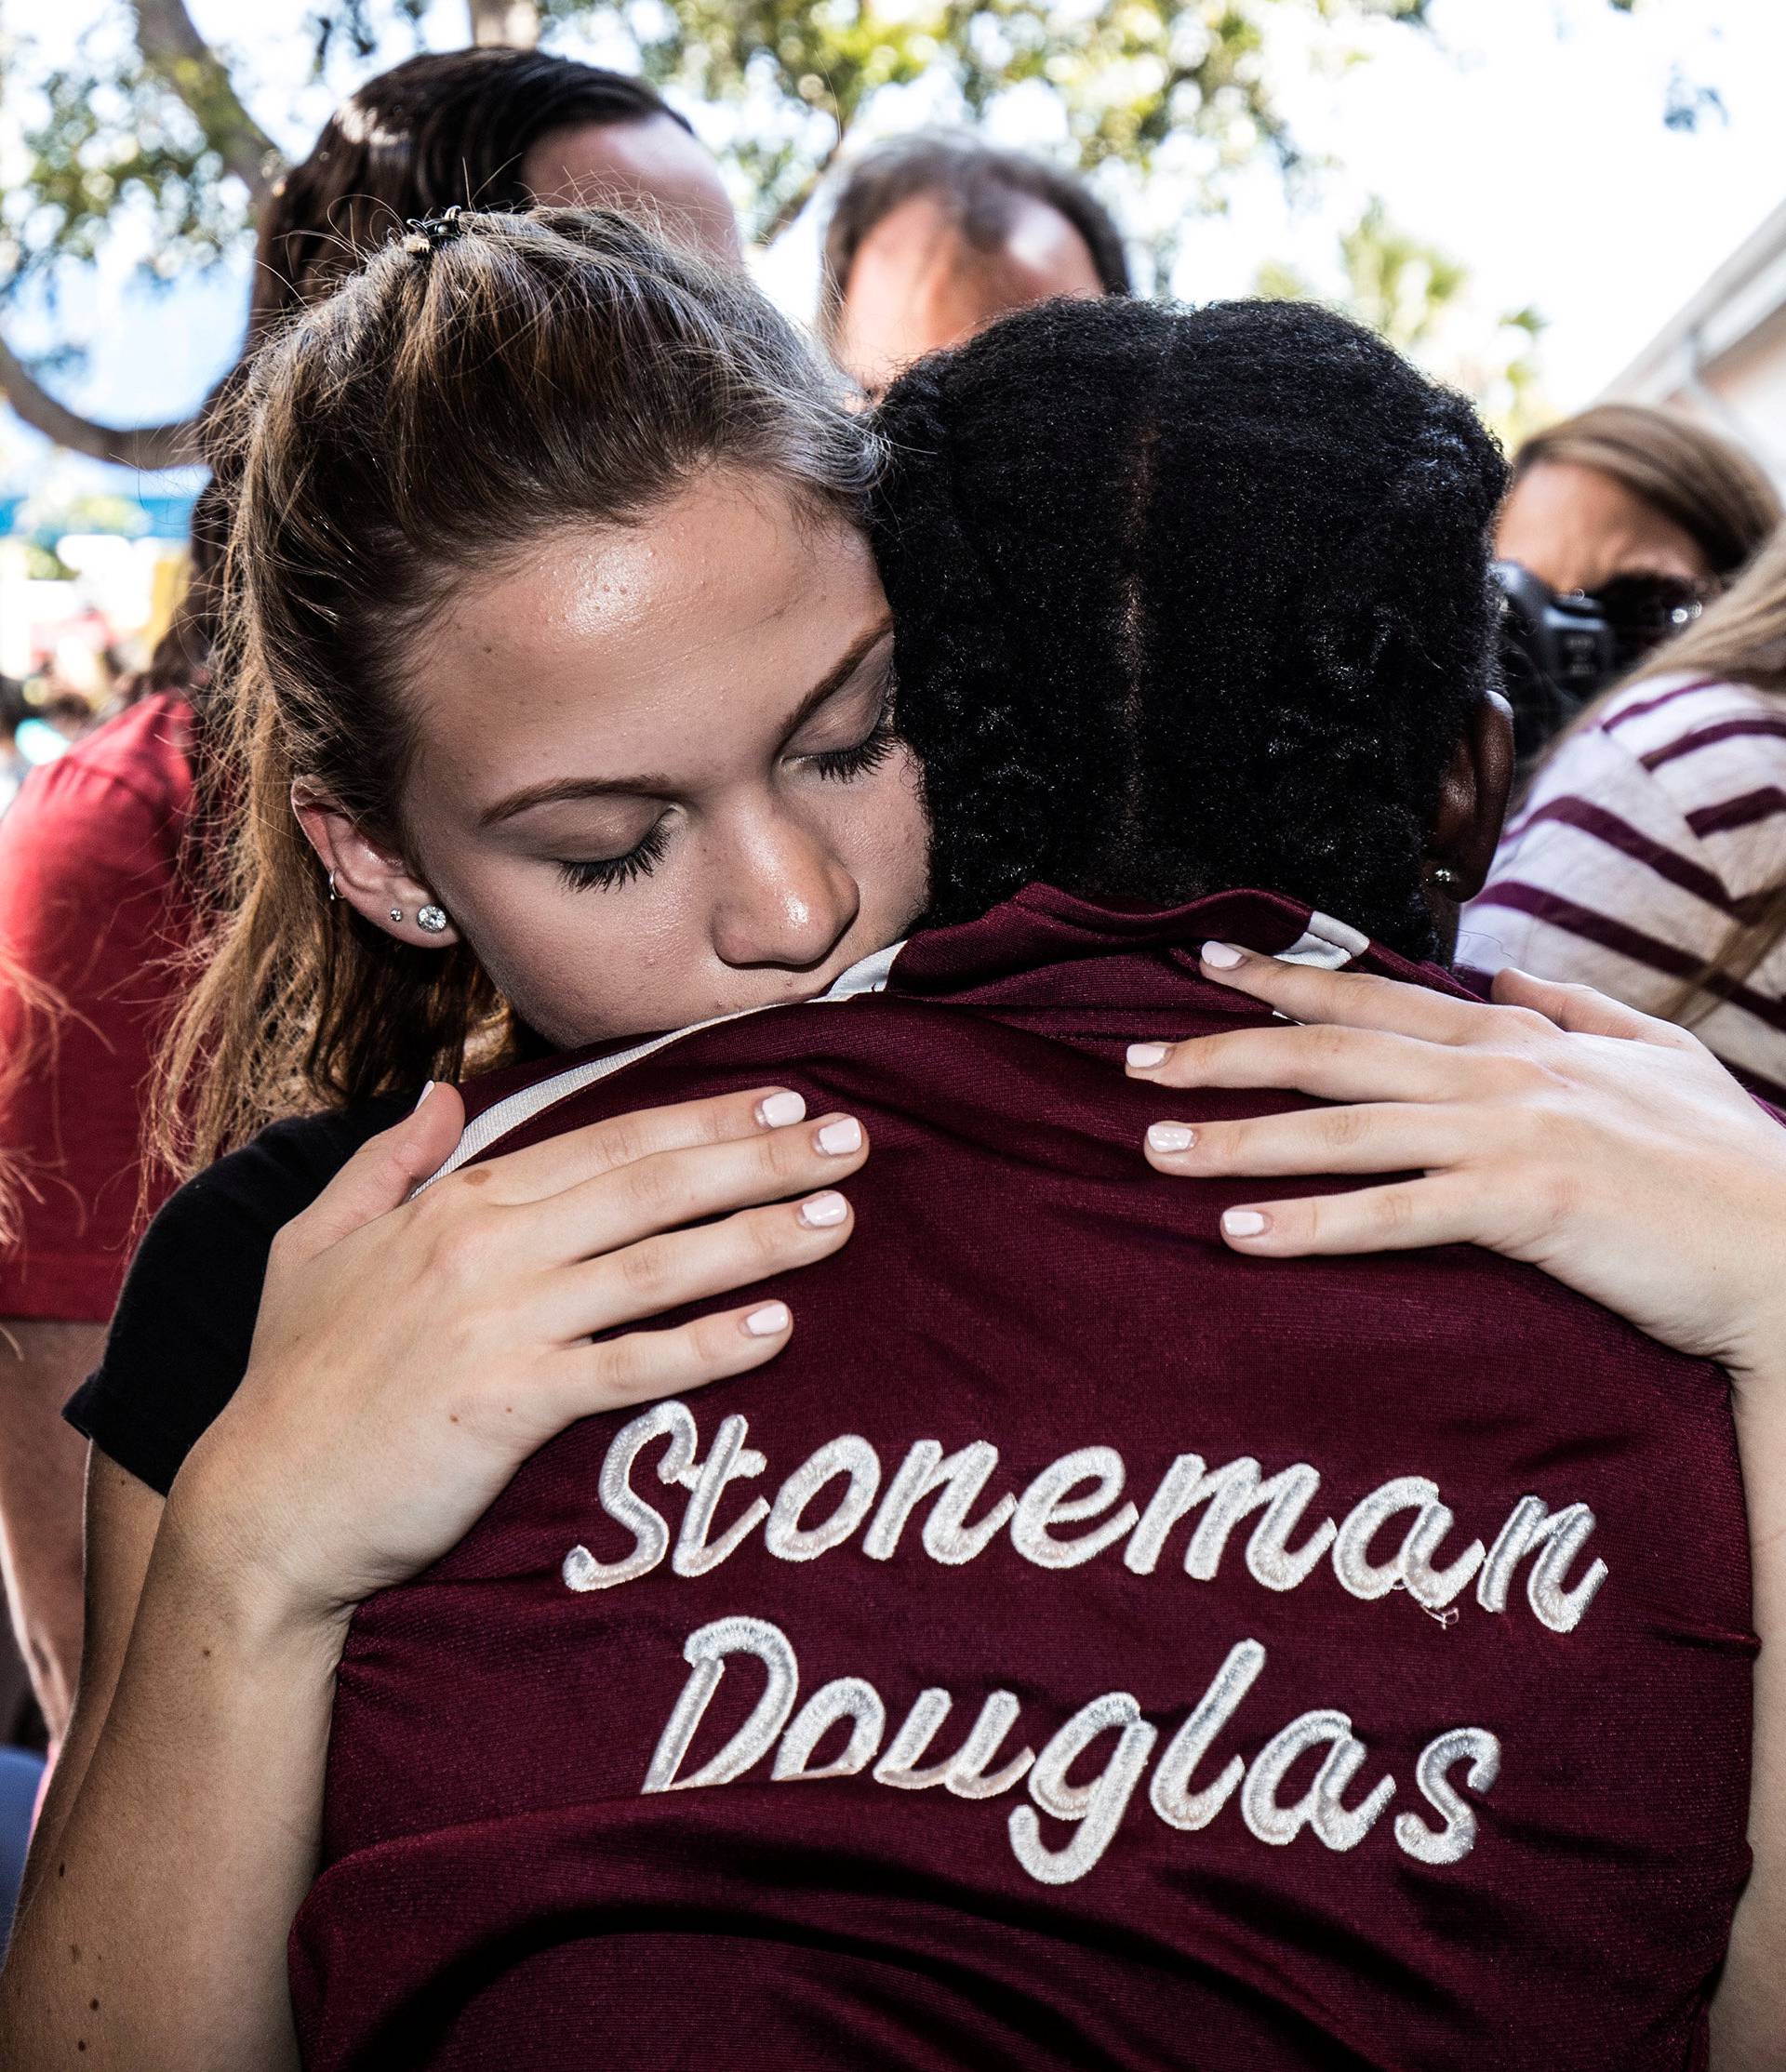 Students from Marjory Stoneman Douglas High School attend a memorial following a school shooting incident in Parkland